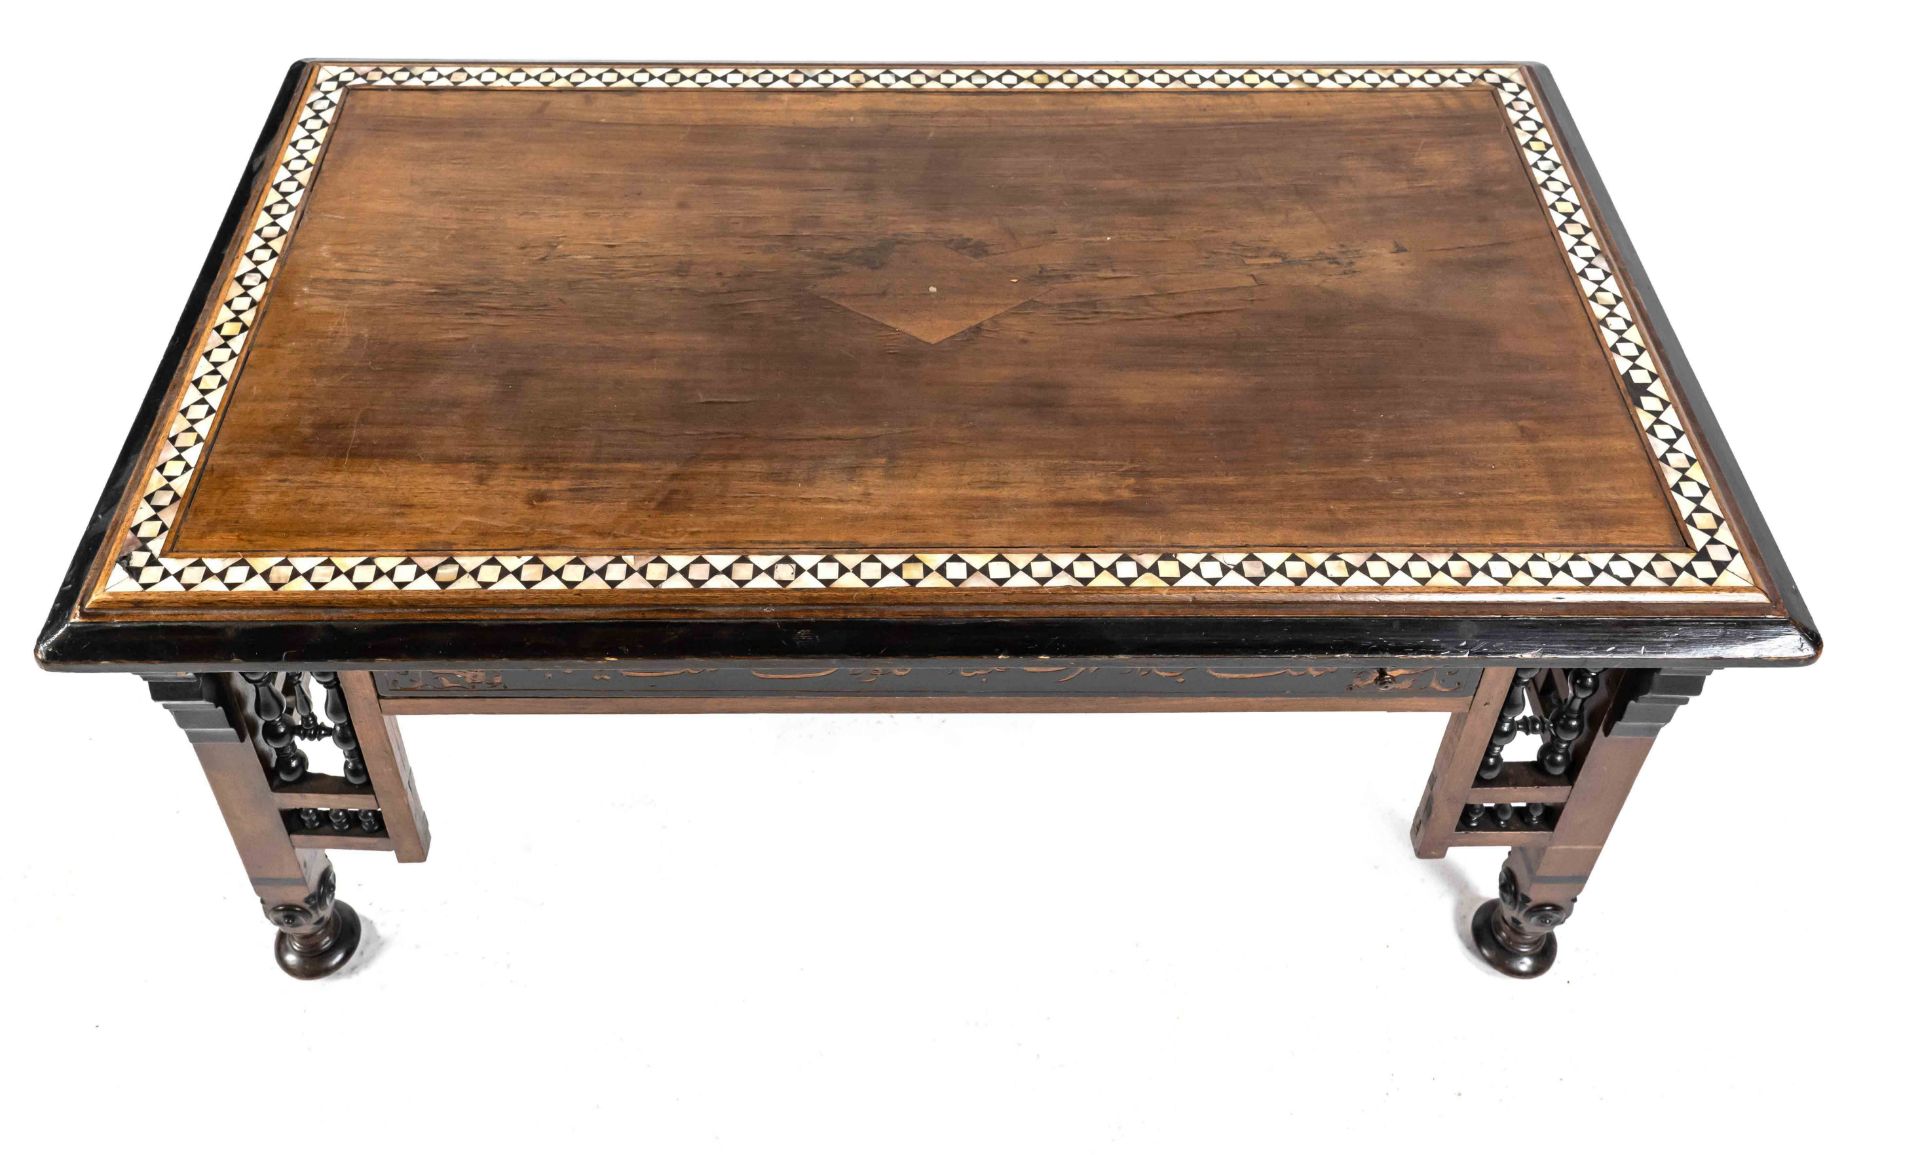 Oriental coffee table with mother-of-pearl inlays around 1900, walnut partly ebonized, rectangular - Image 2 of 2